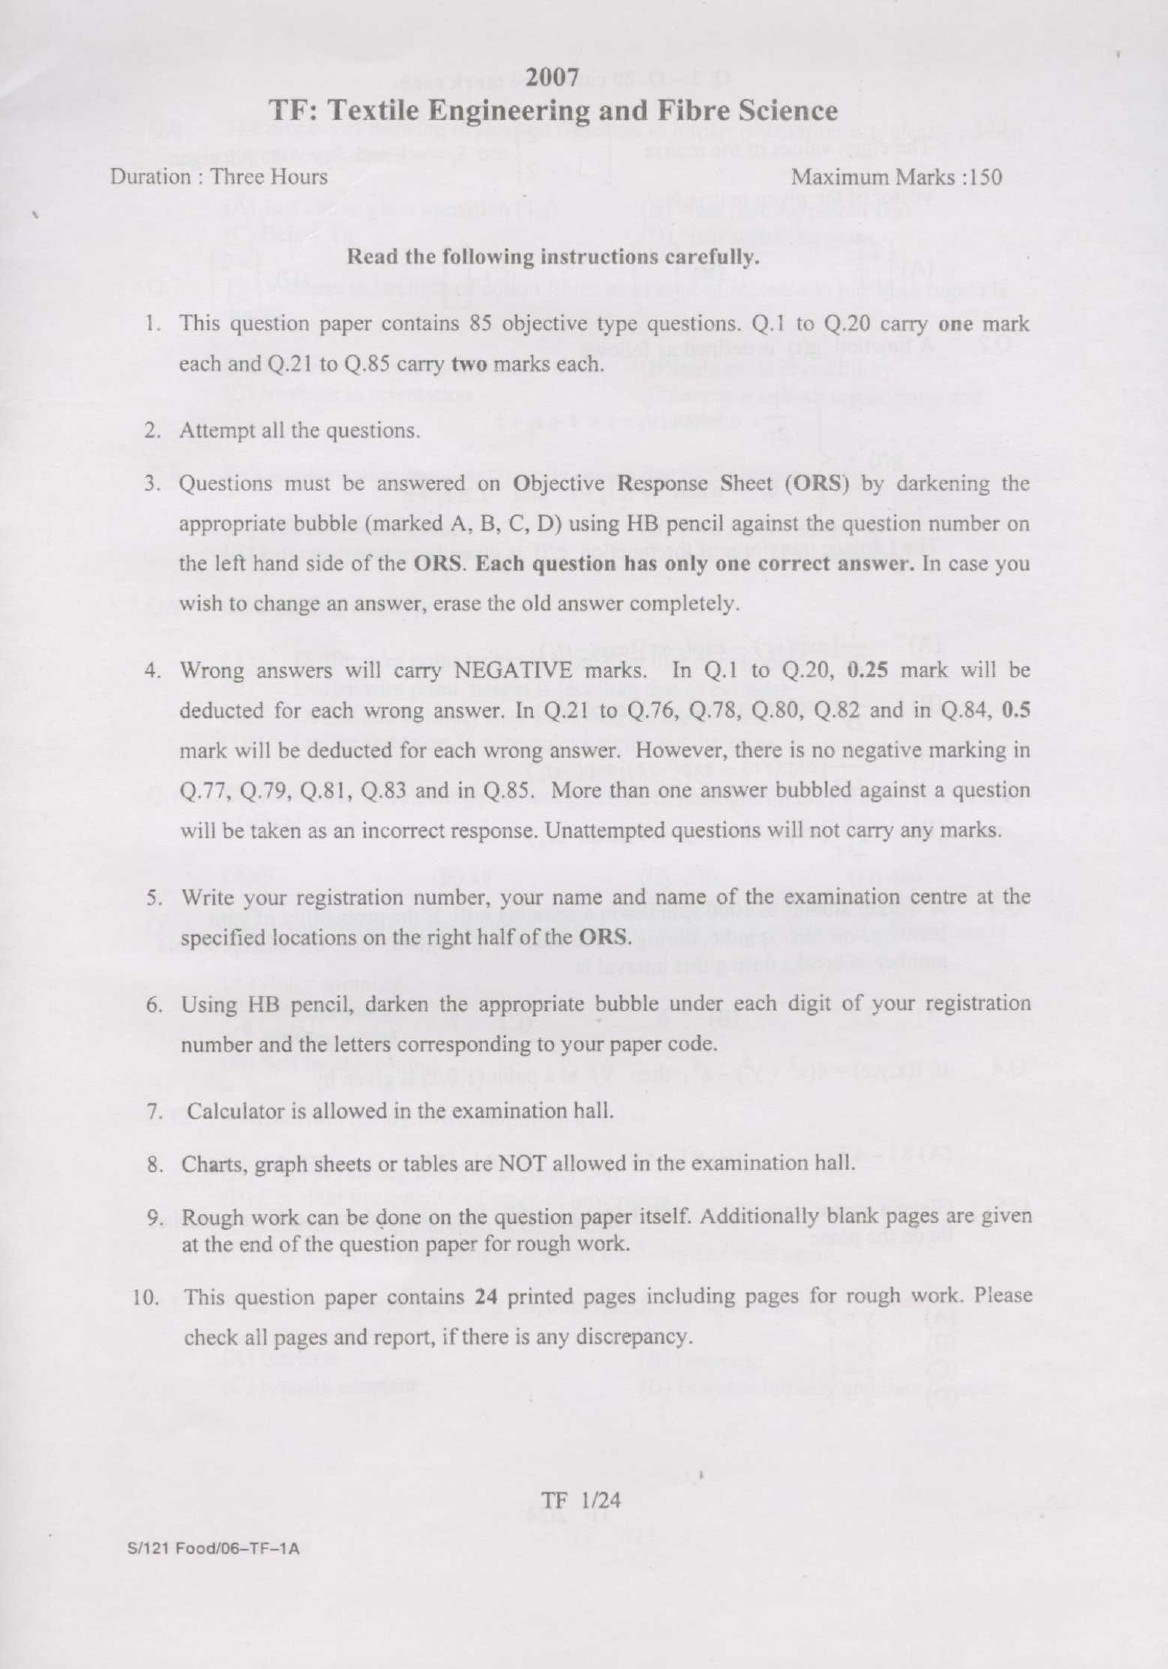 GATE Exam Question Paper 2007 Textile Engineering and Fibre Science 1